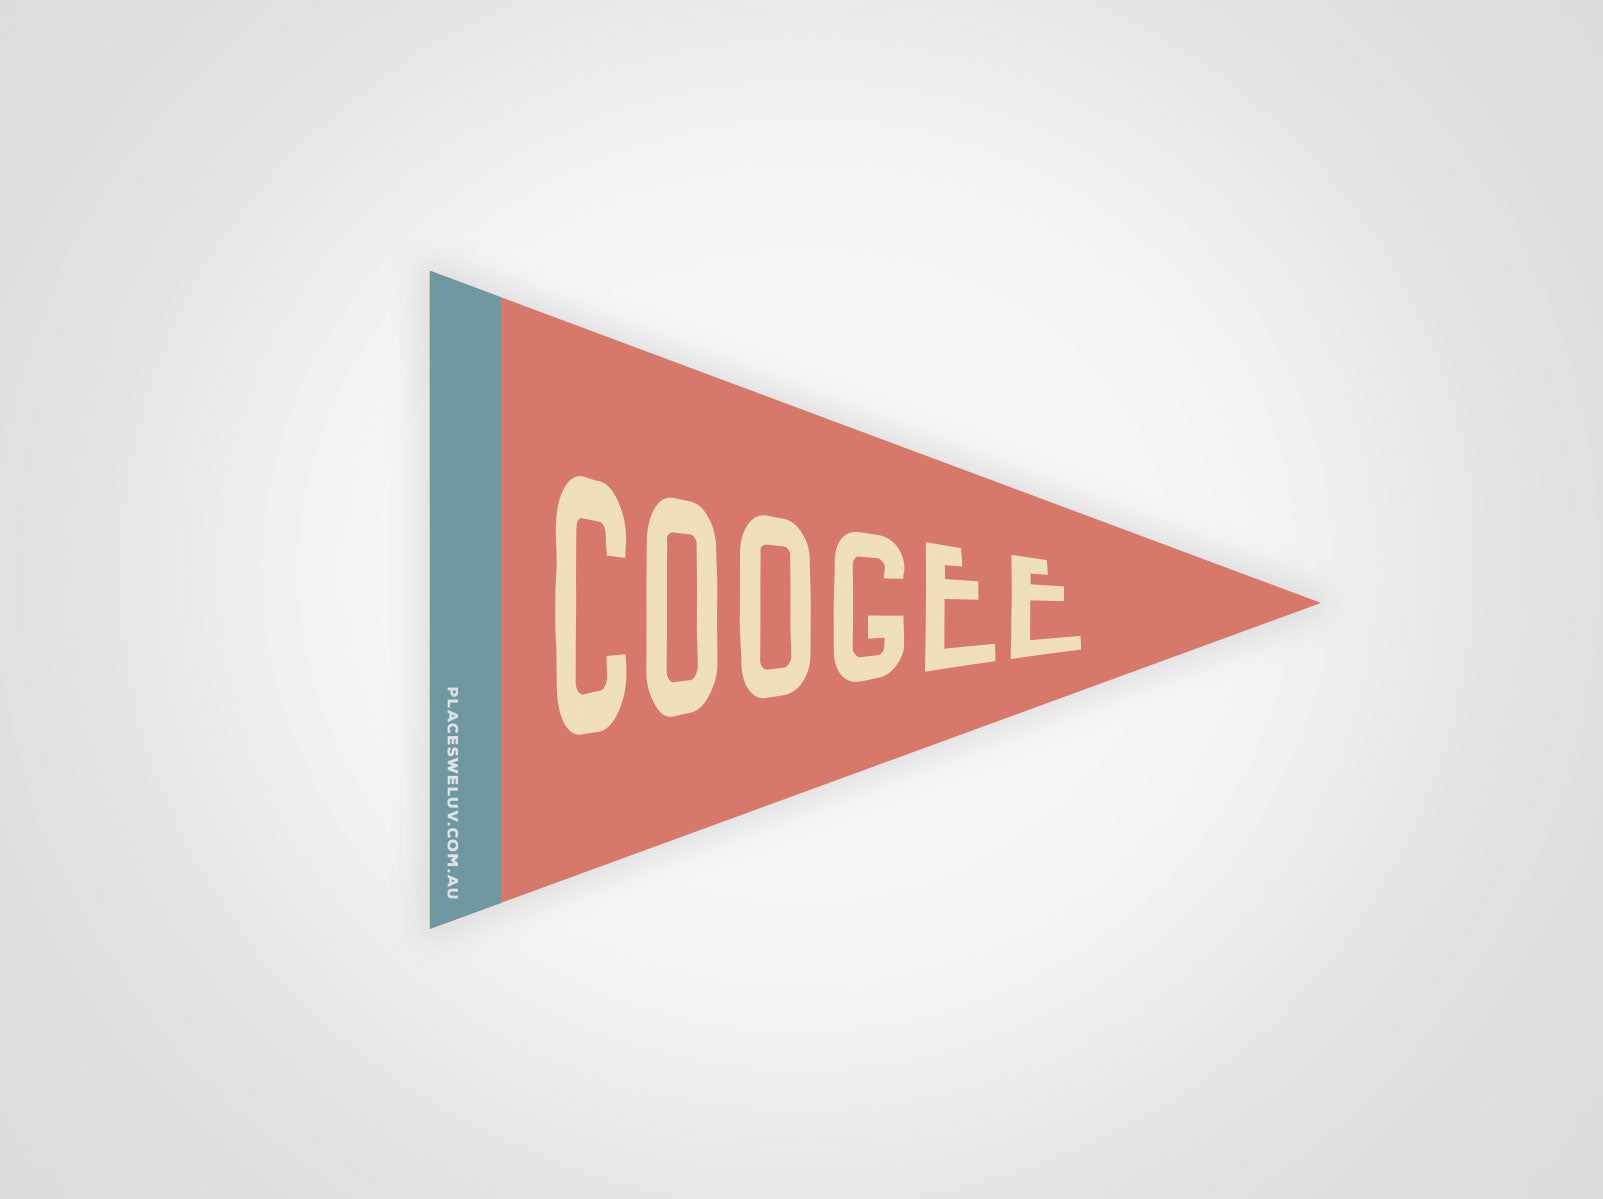 Coogee travel flag decal